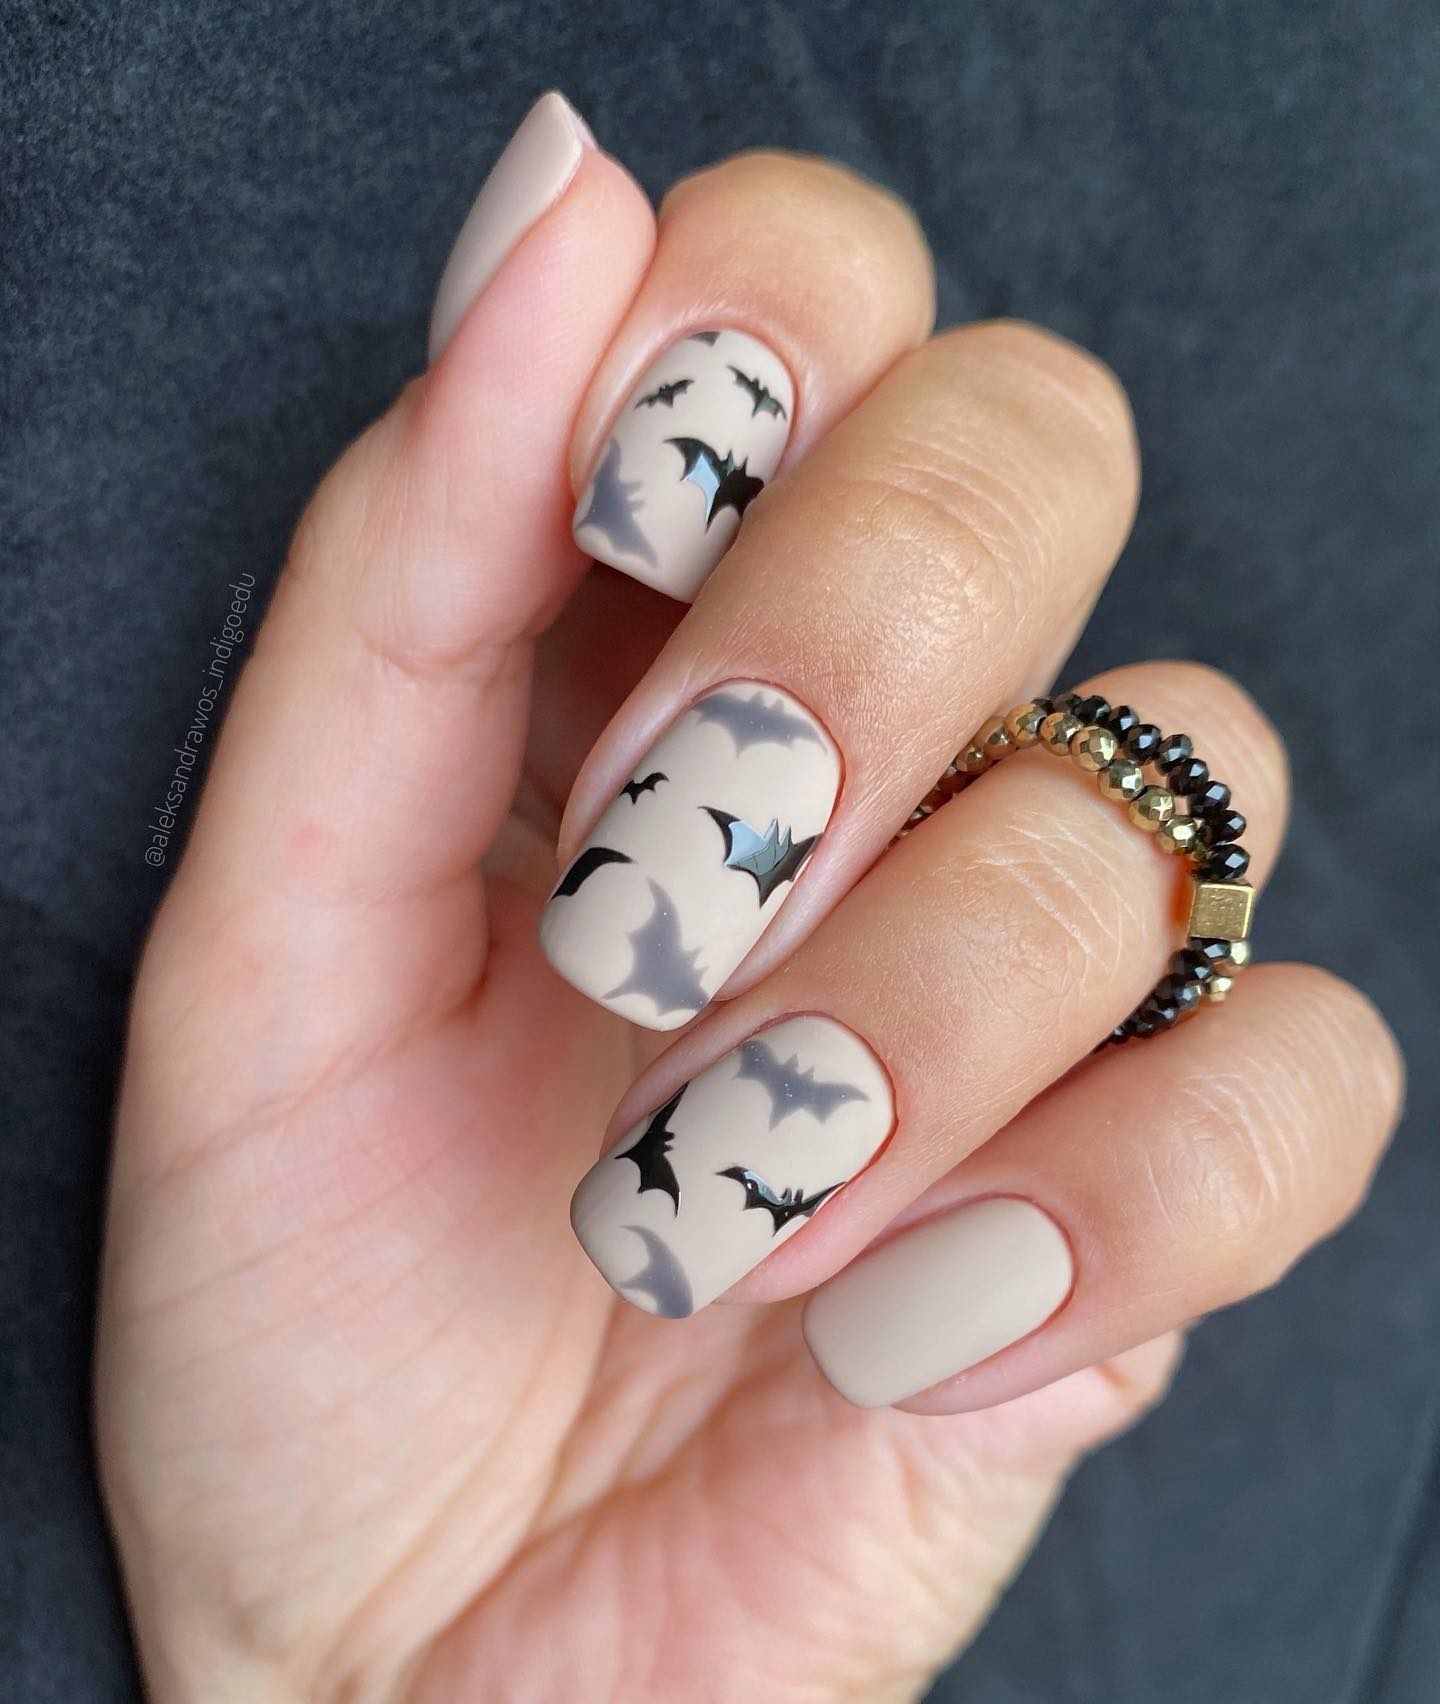 Bat nails are a great way to add a little something extra to your manicure. They can be done in a number of different ways, from just painting bat wings on nude matte manicure.